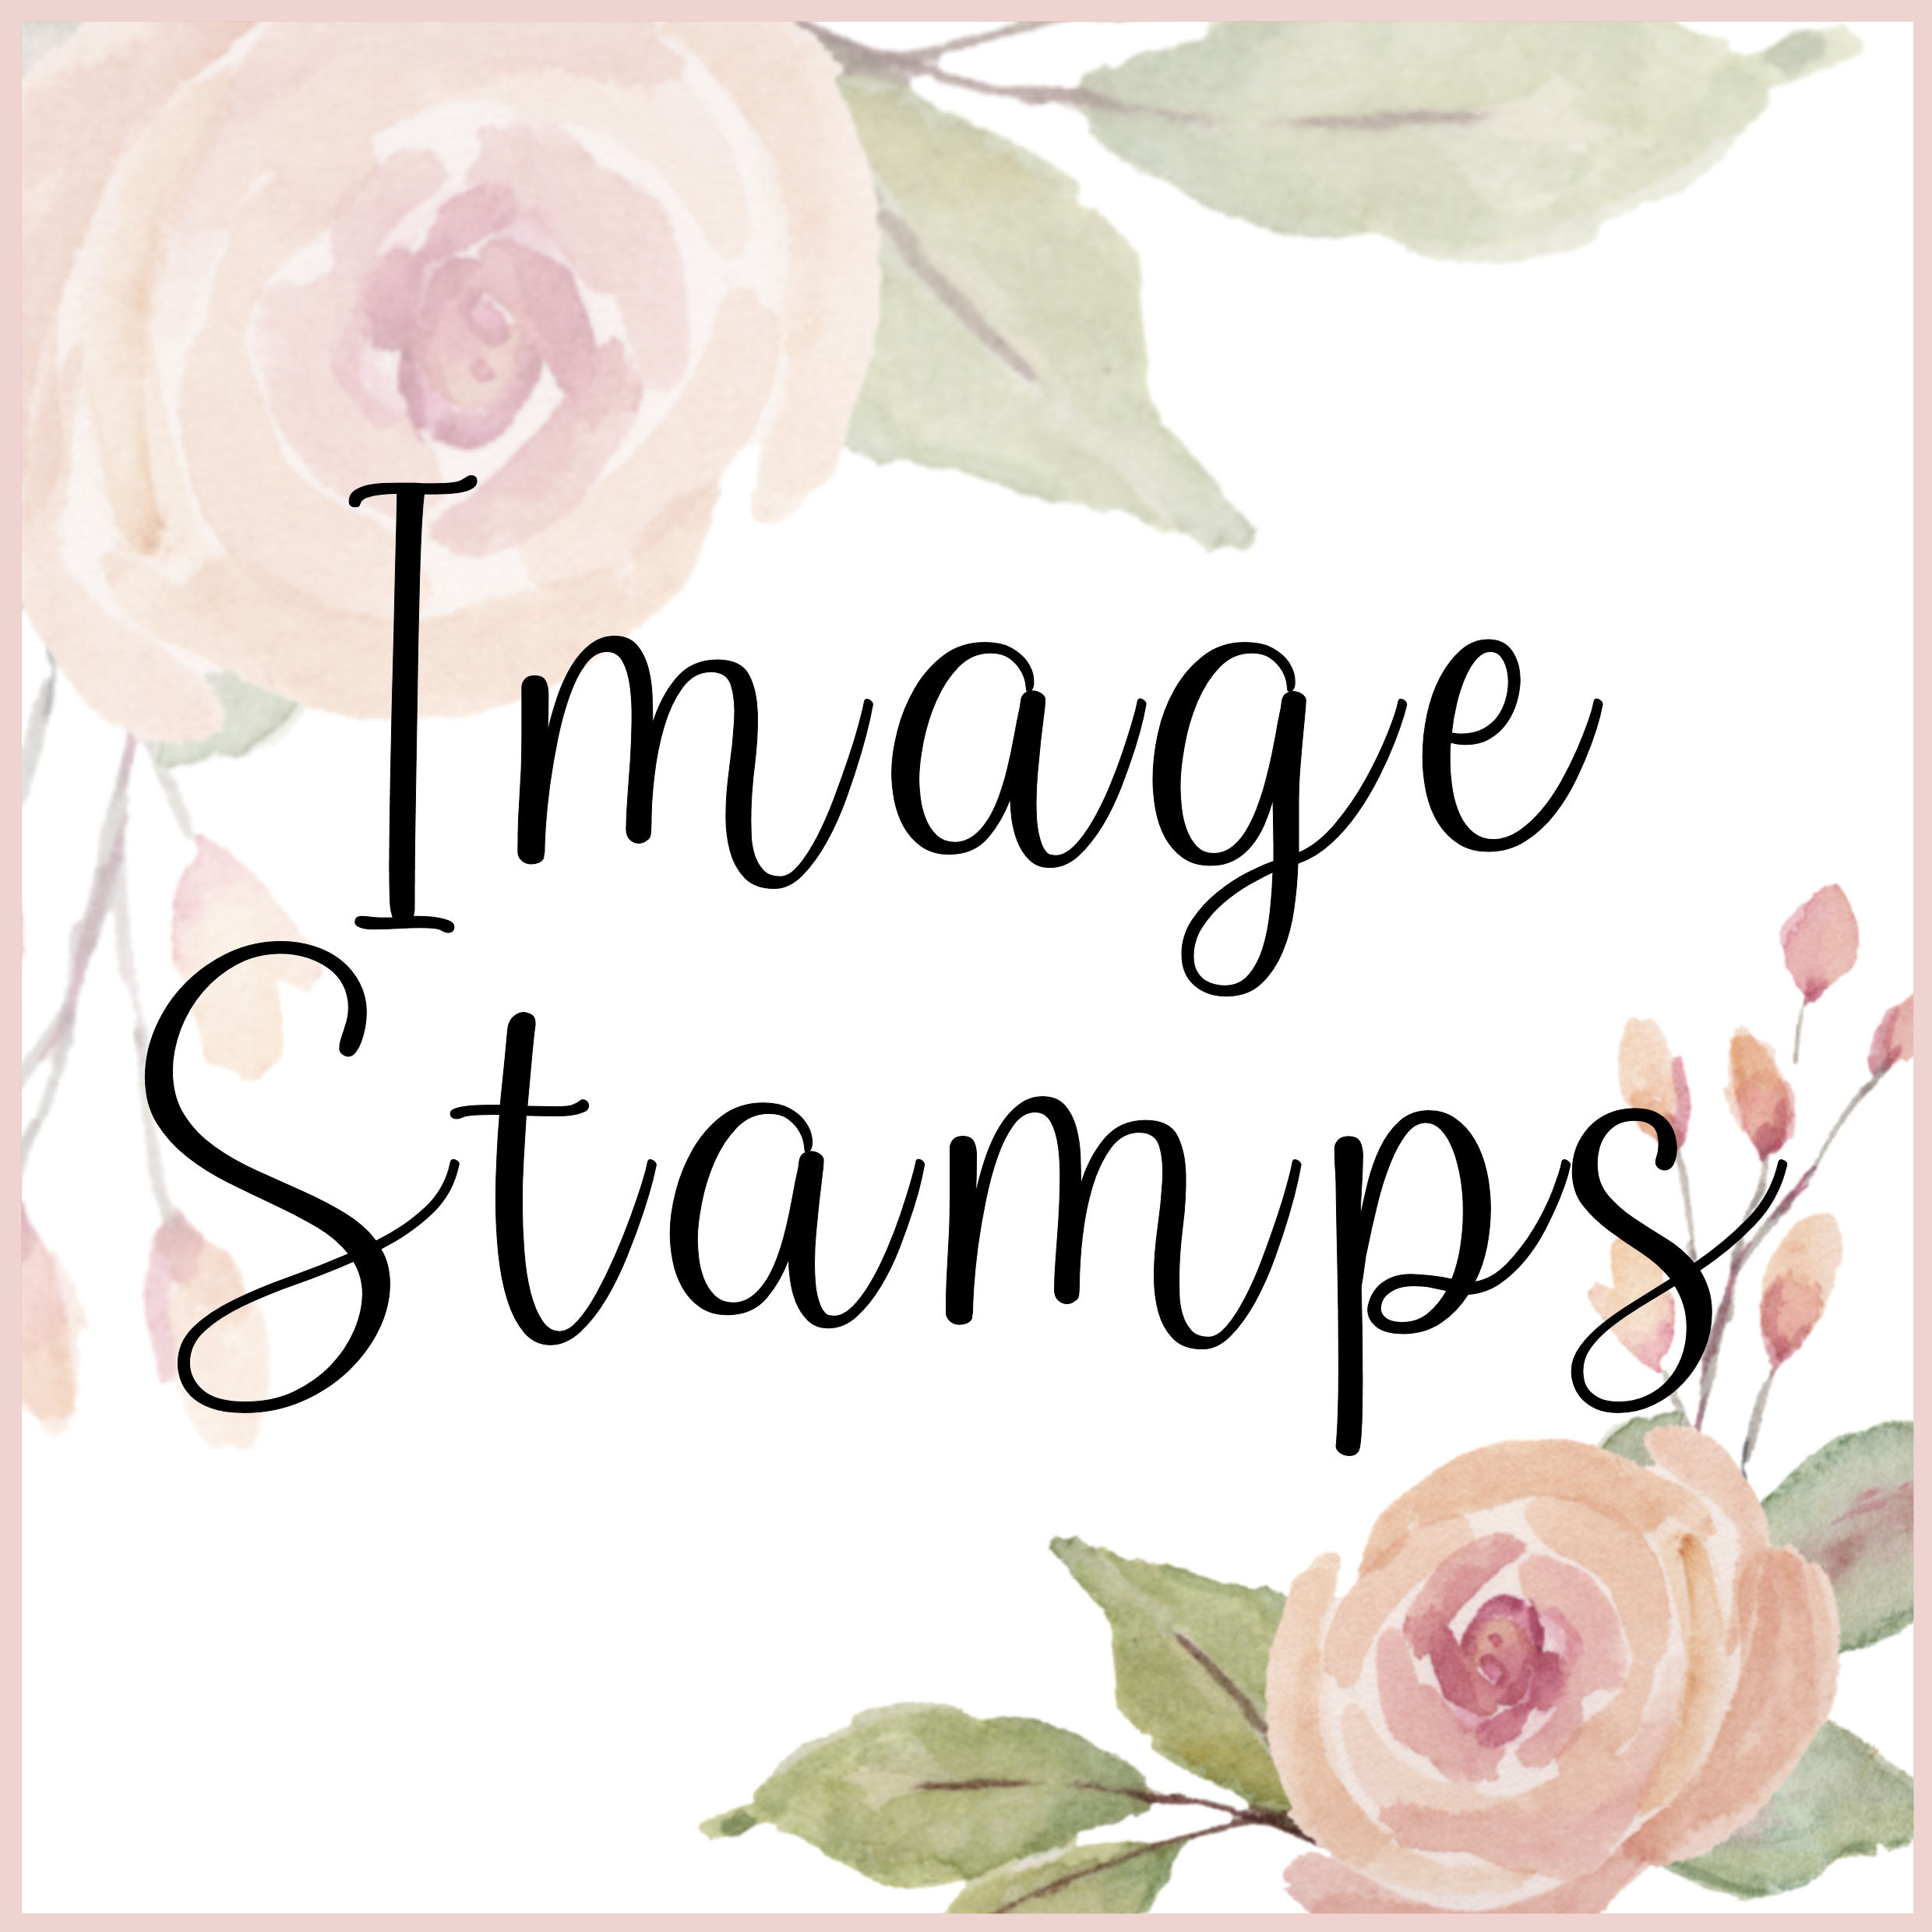 Image Stamps